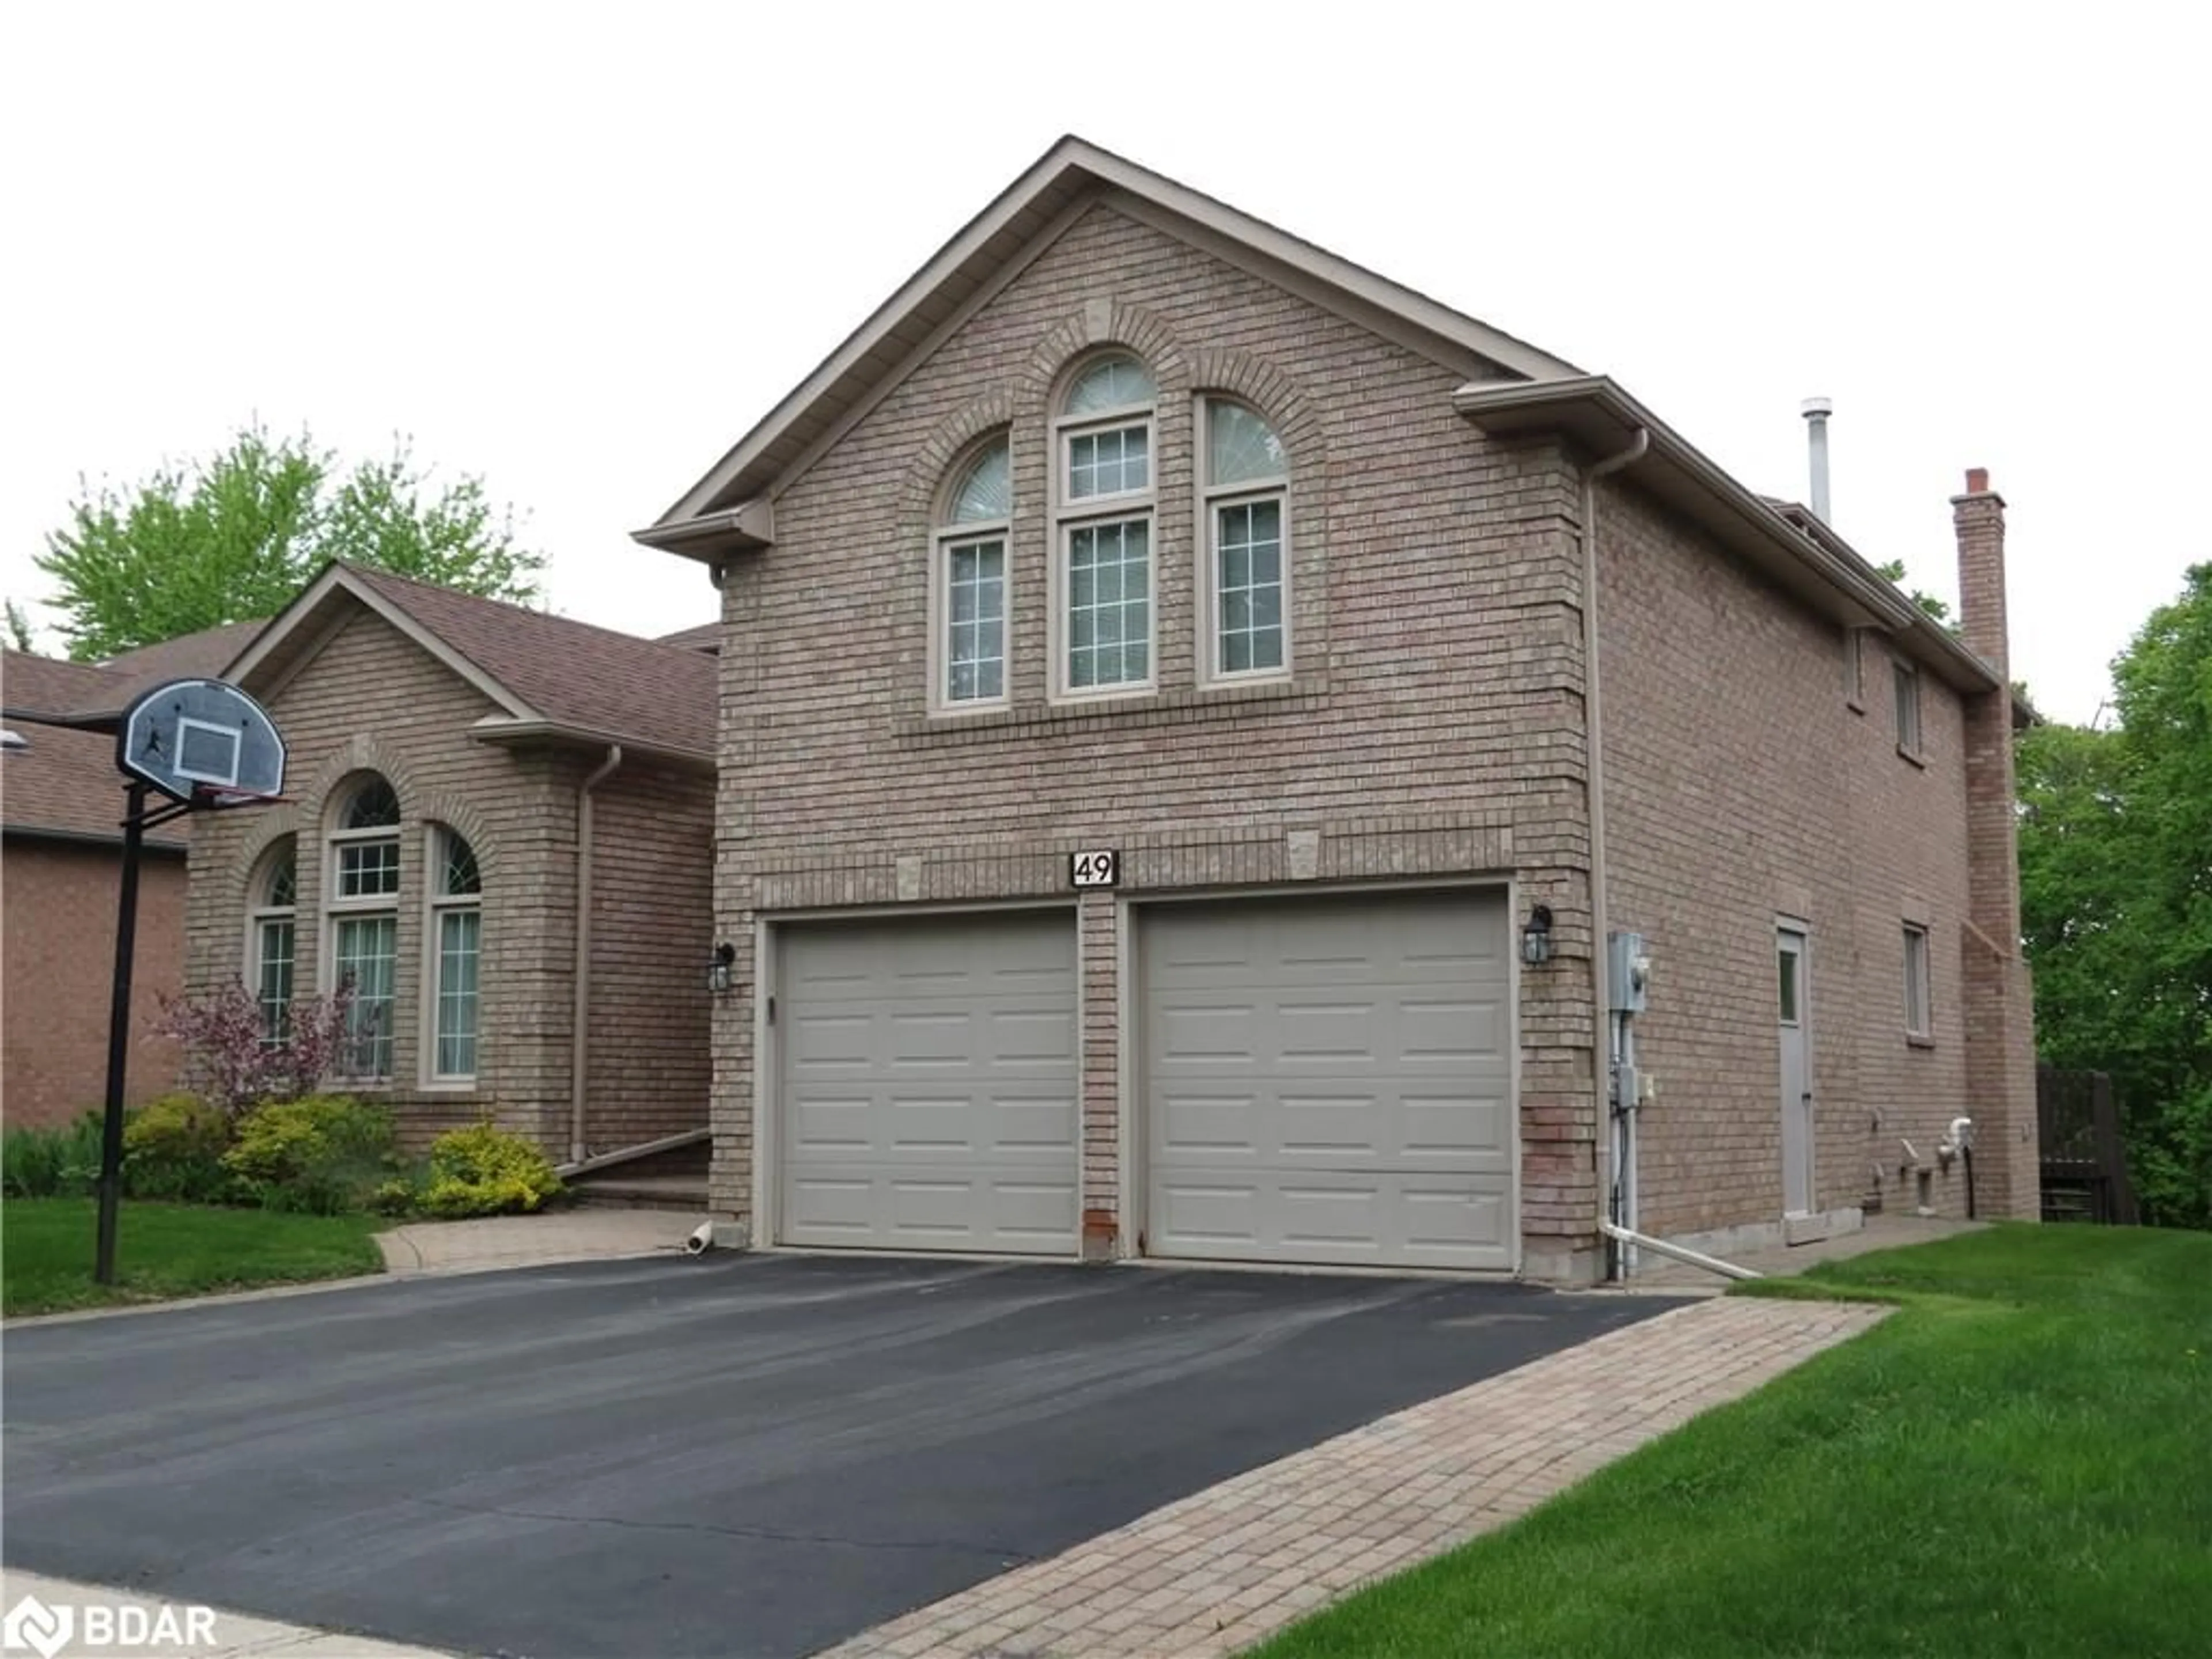 Home with brick exterior material for 49 Cityview Cir, Barrie Ontario L4N 7V1